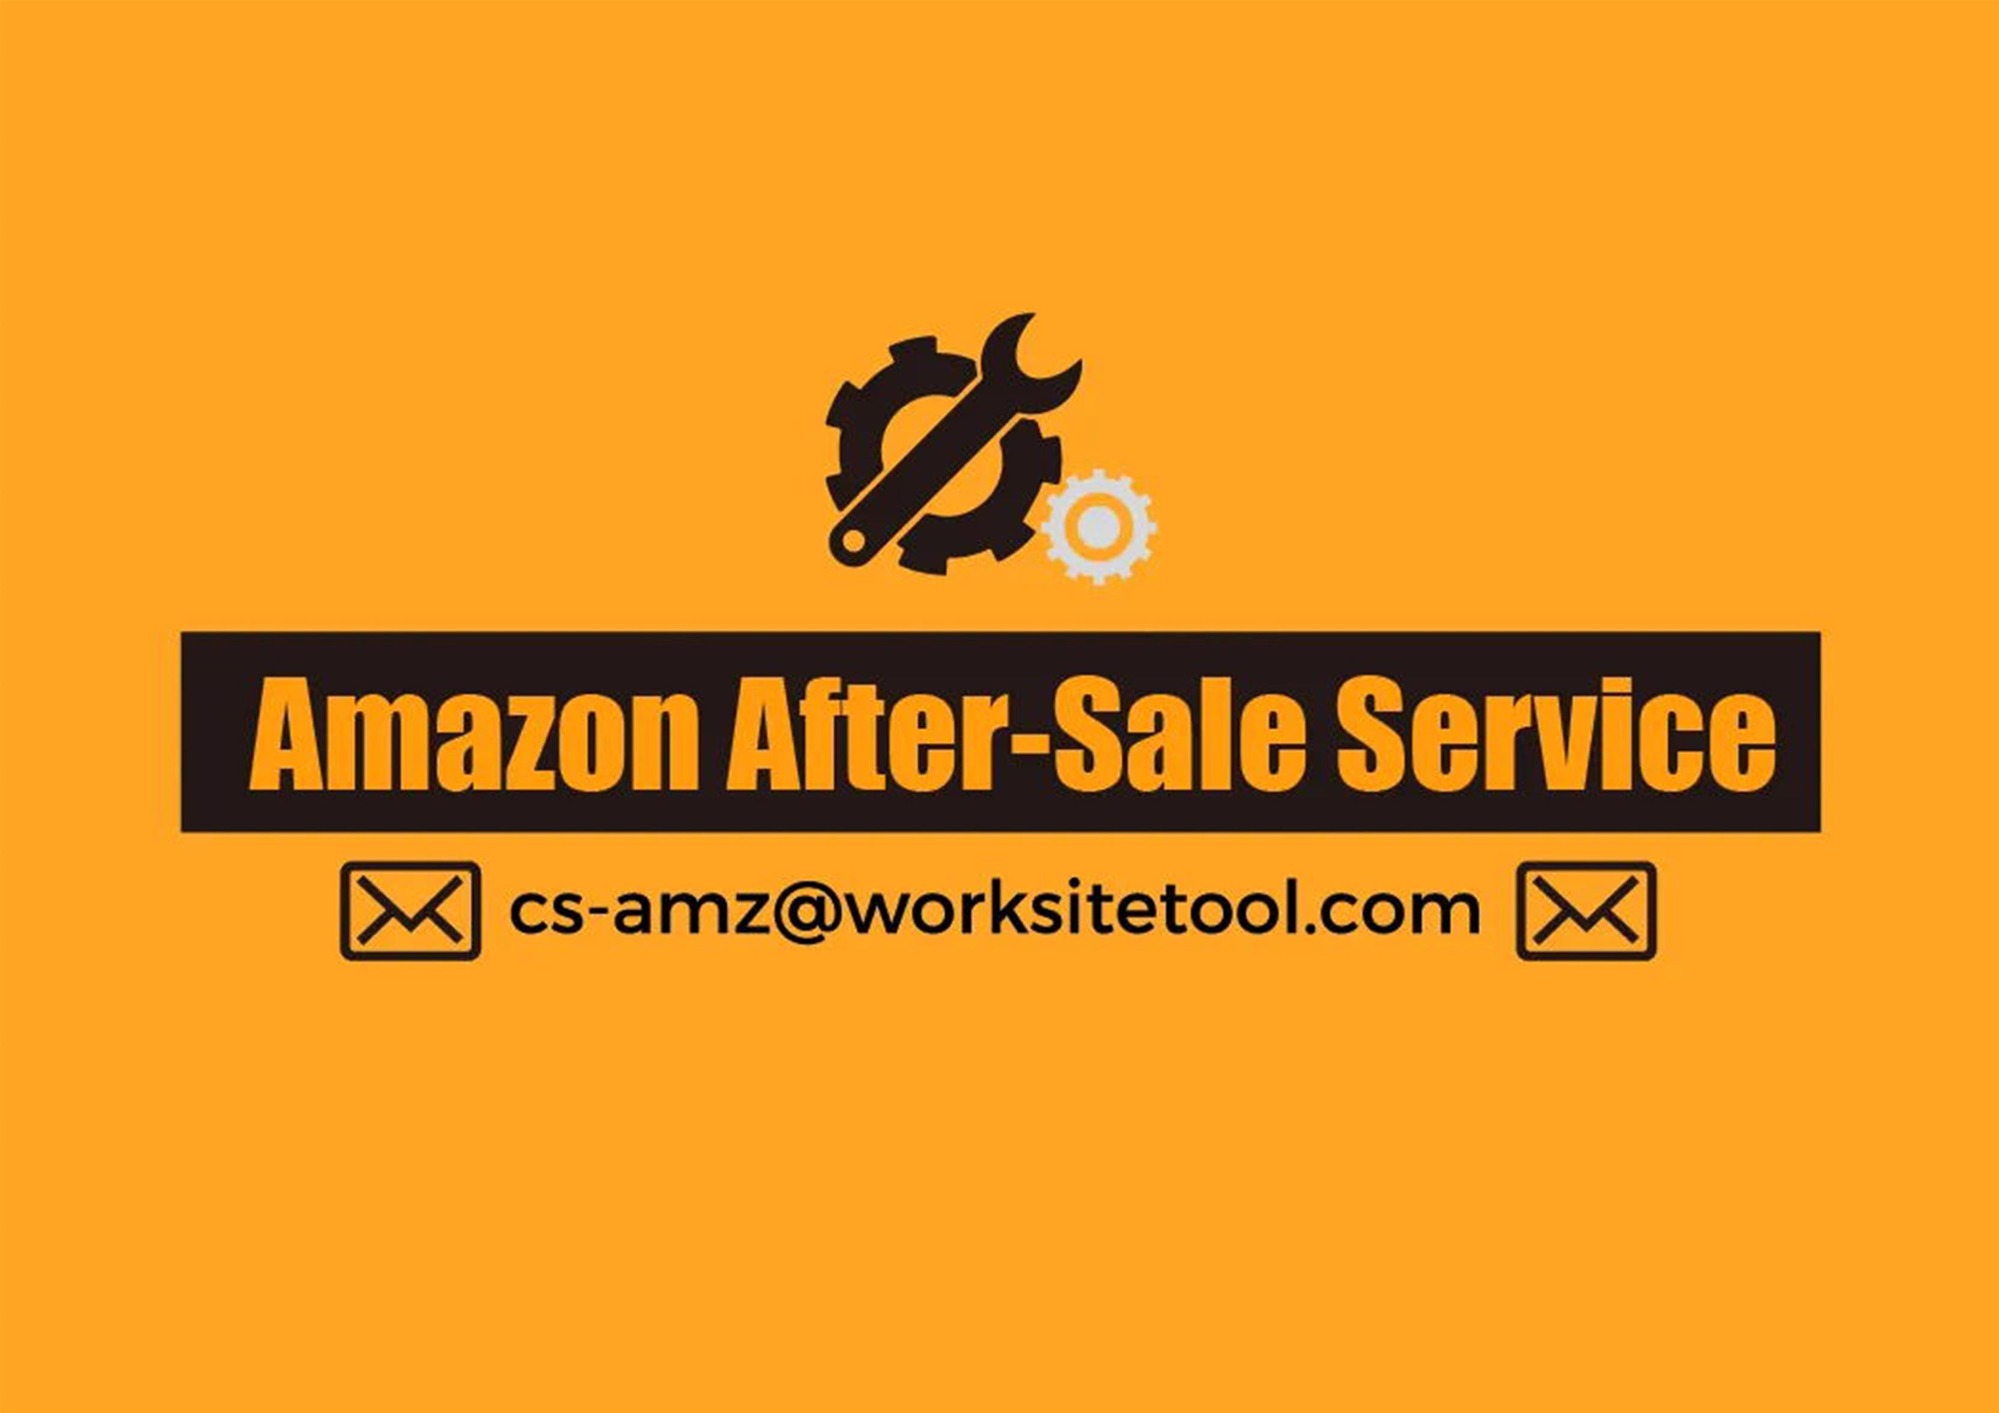 About Amazon After-Sale Service